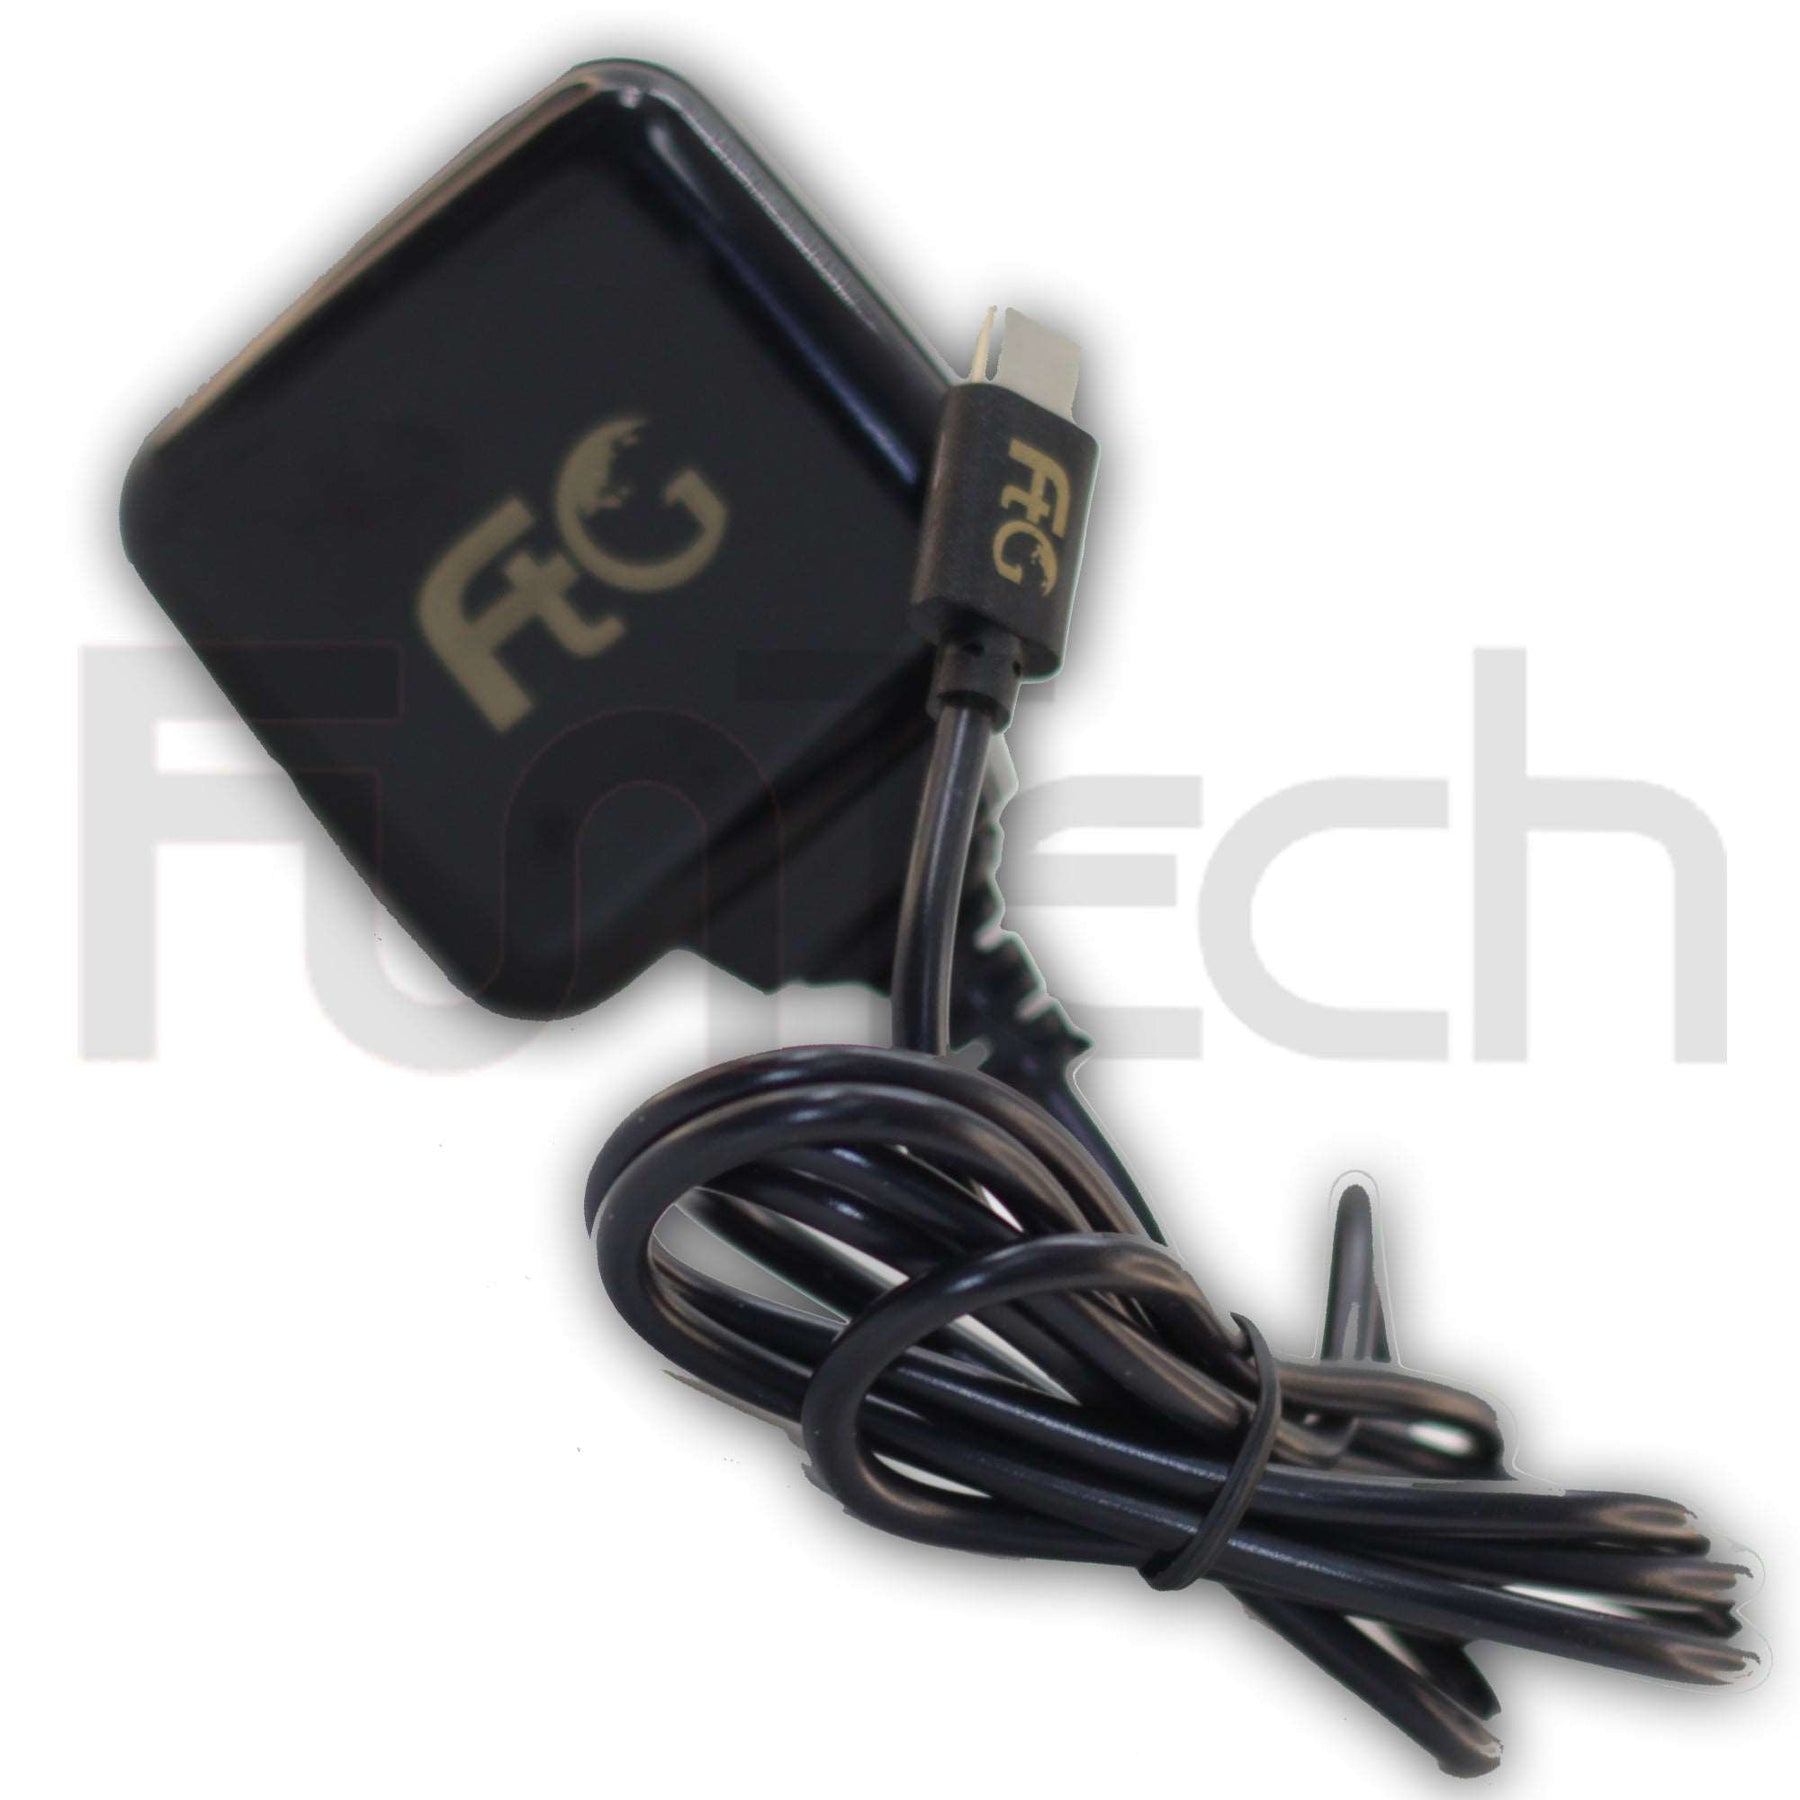 2.4 A, Travel Charger, 1.2 M Cable, UK Plug Black,